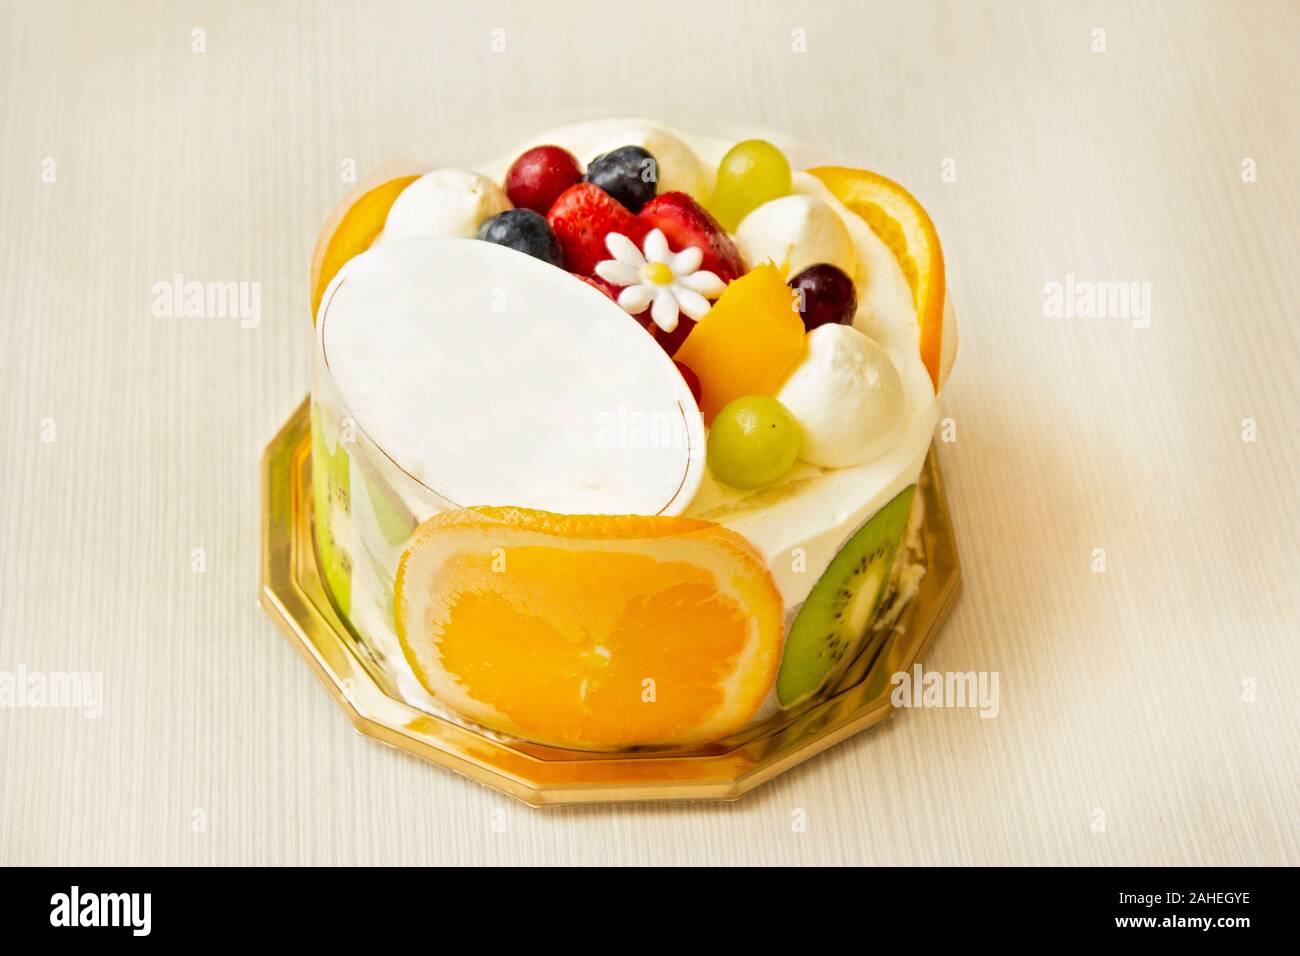 A Fruit  Cake With white Chocolate name Card for any celebration like birthday, christmas, anniversary, marriage,valentine day, retire etc Stock Photo